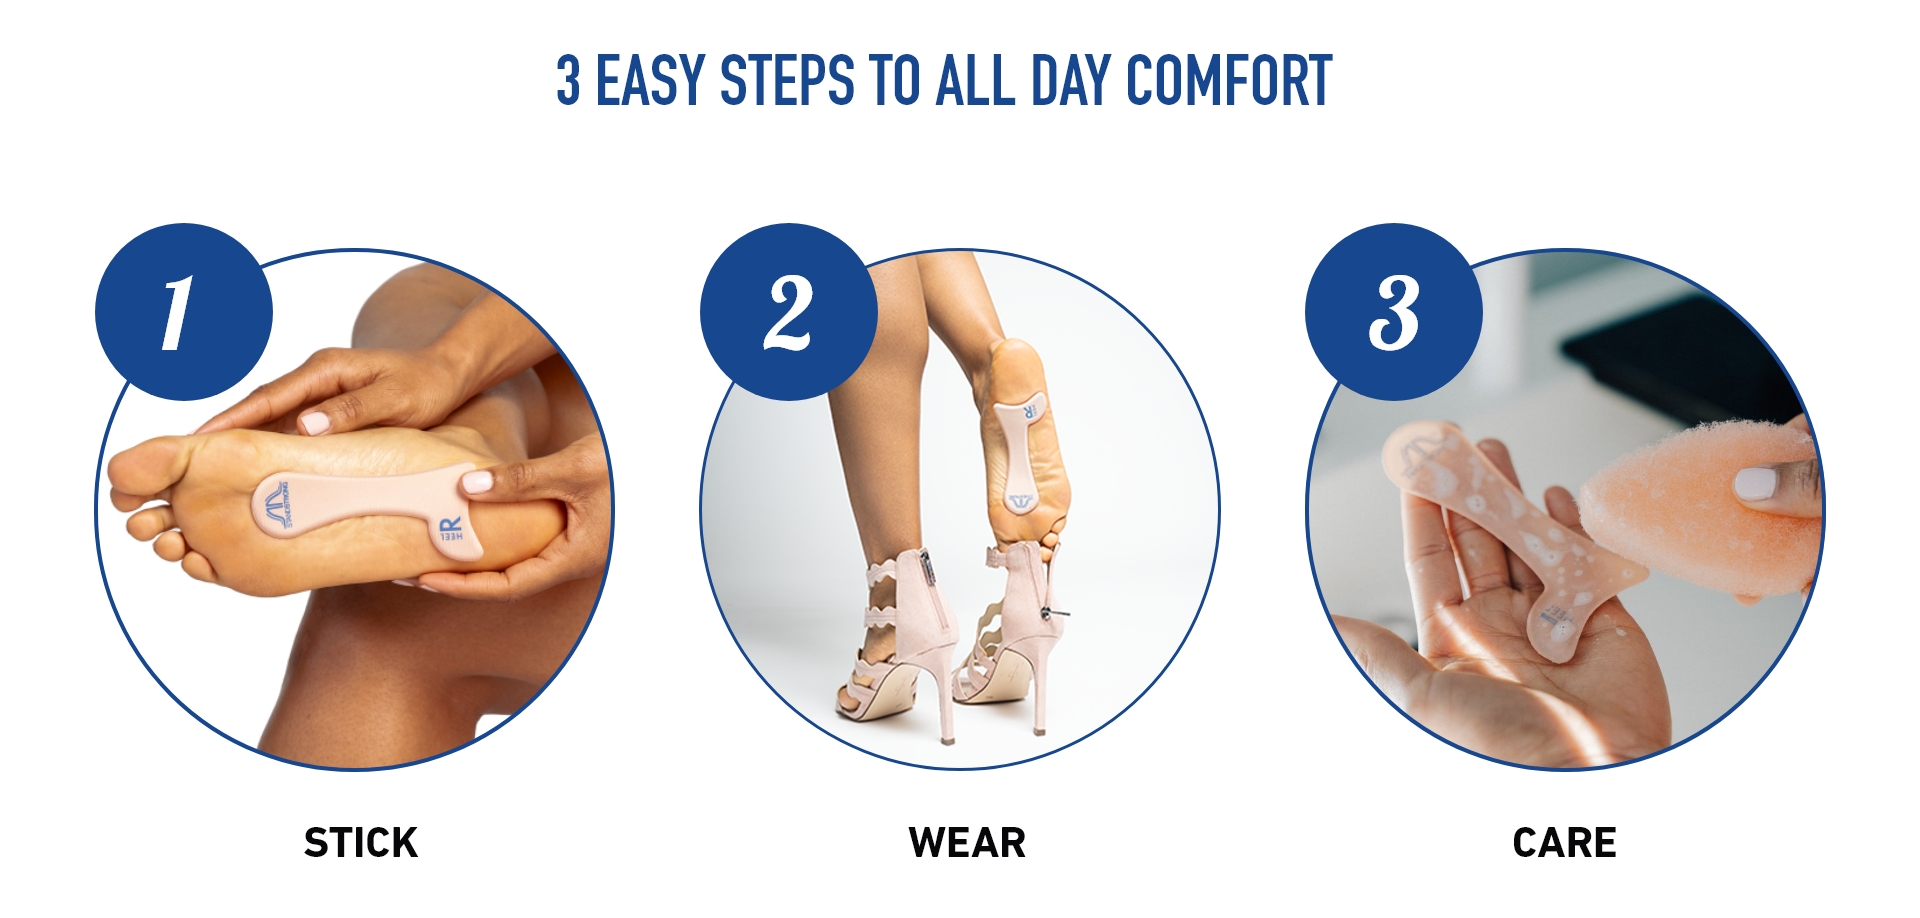 Three easy steps to all day comfort